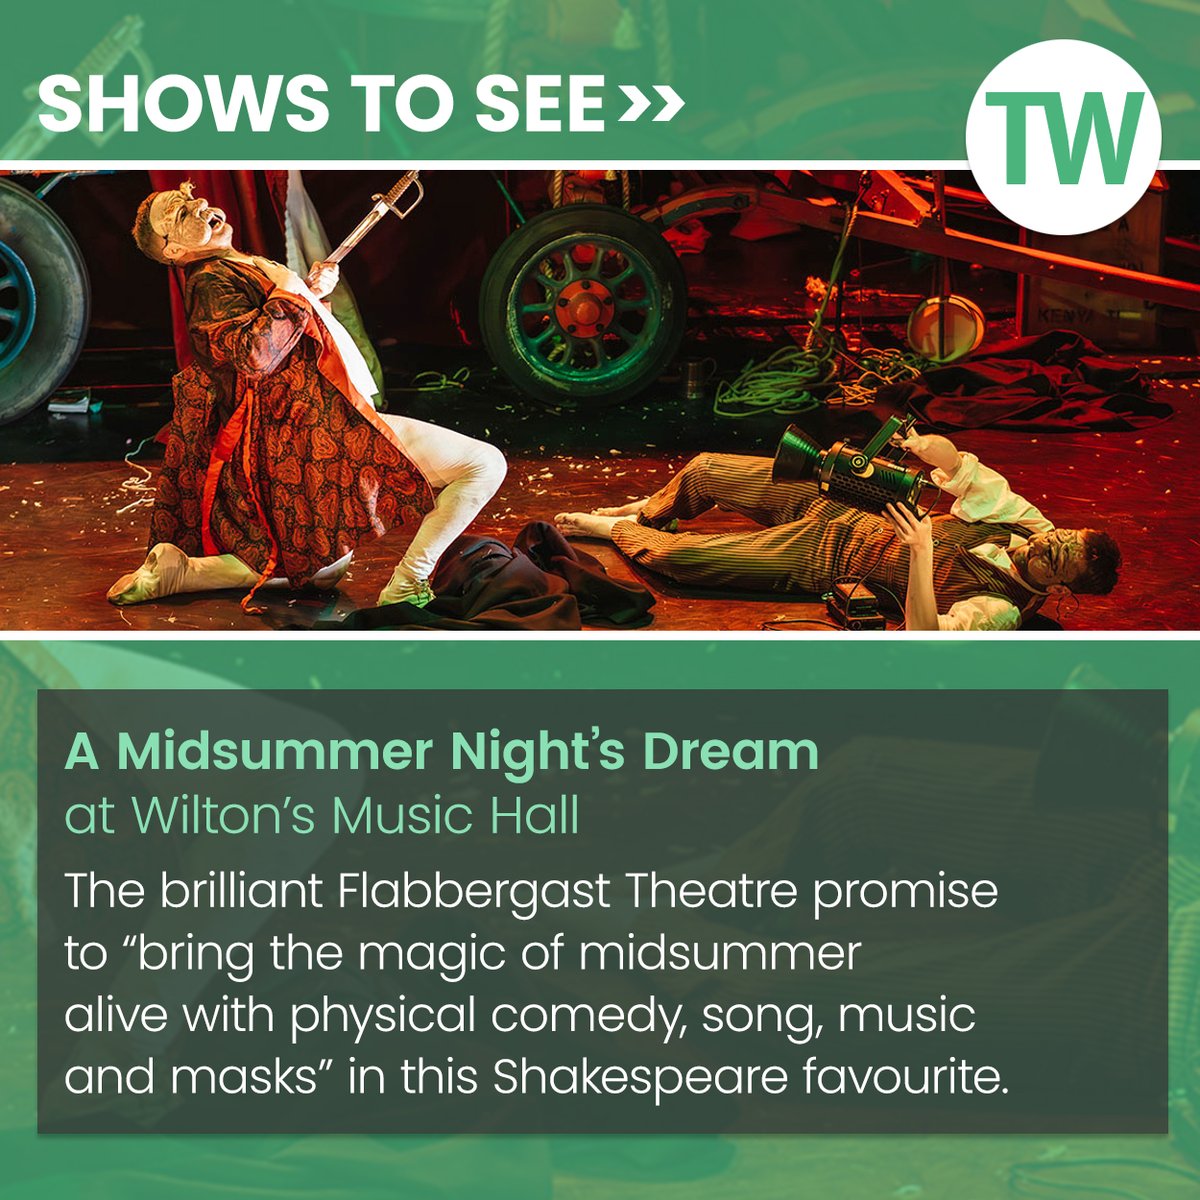 Among our recommended shows to see this week: 'A Midsummer Night's Dream' by Flabbergast Theatre at Wilton's Music Hall. Get more show tips here: bit.ly/3TORapH @wiltonmusichall @FlabbergastT